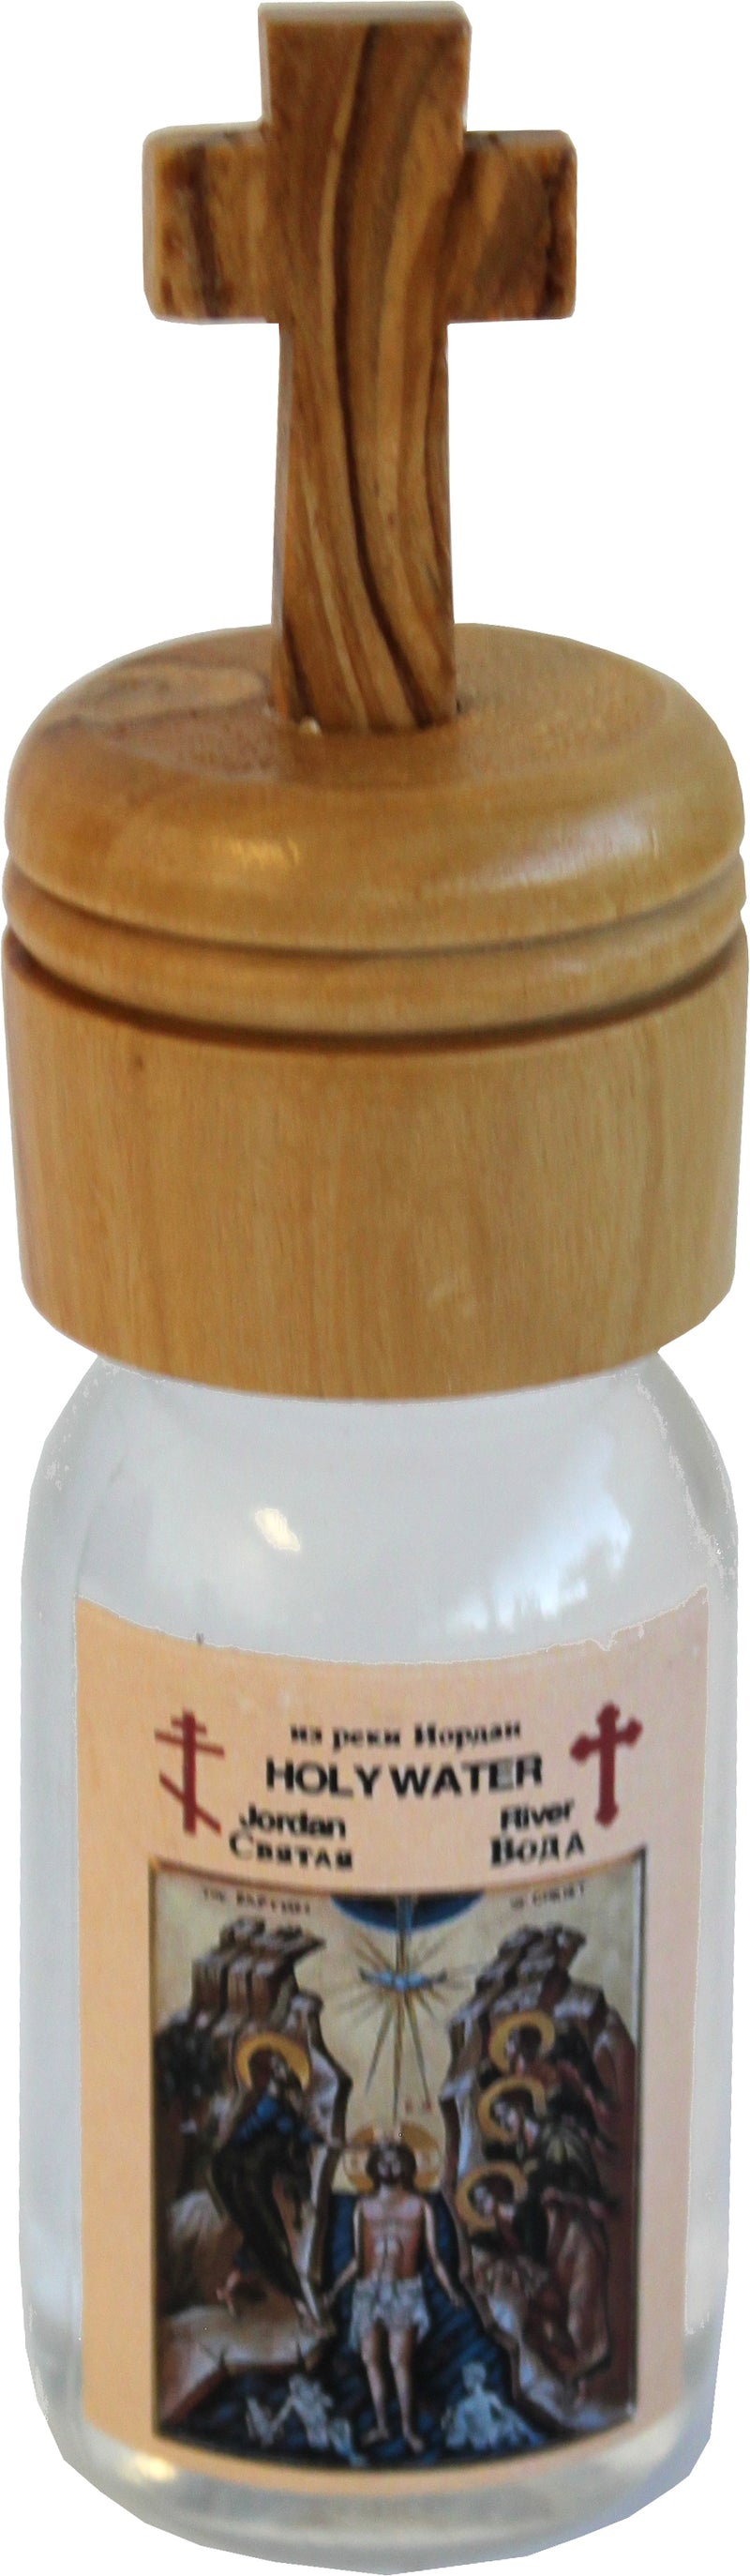 Jordan River Holy Water Holy Sepulchre Jerusalem with Extra Olive Wood with Cross Cover - Scented